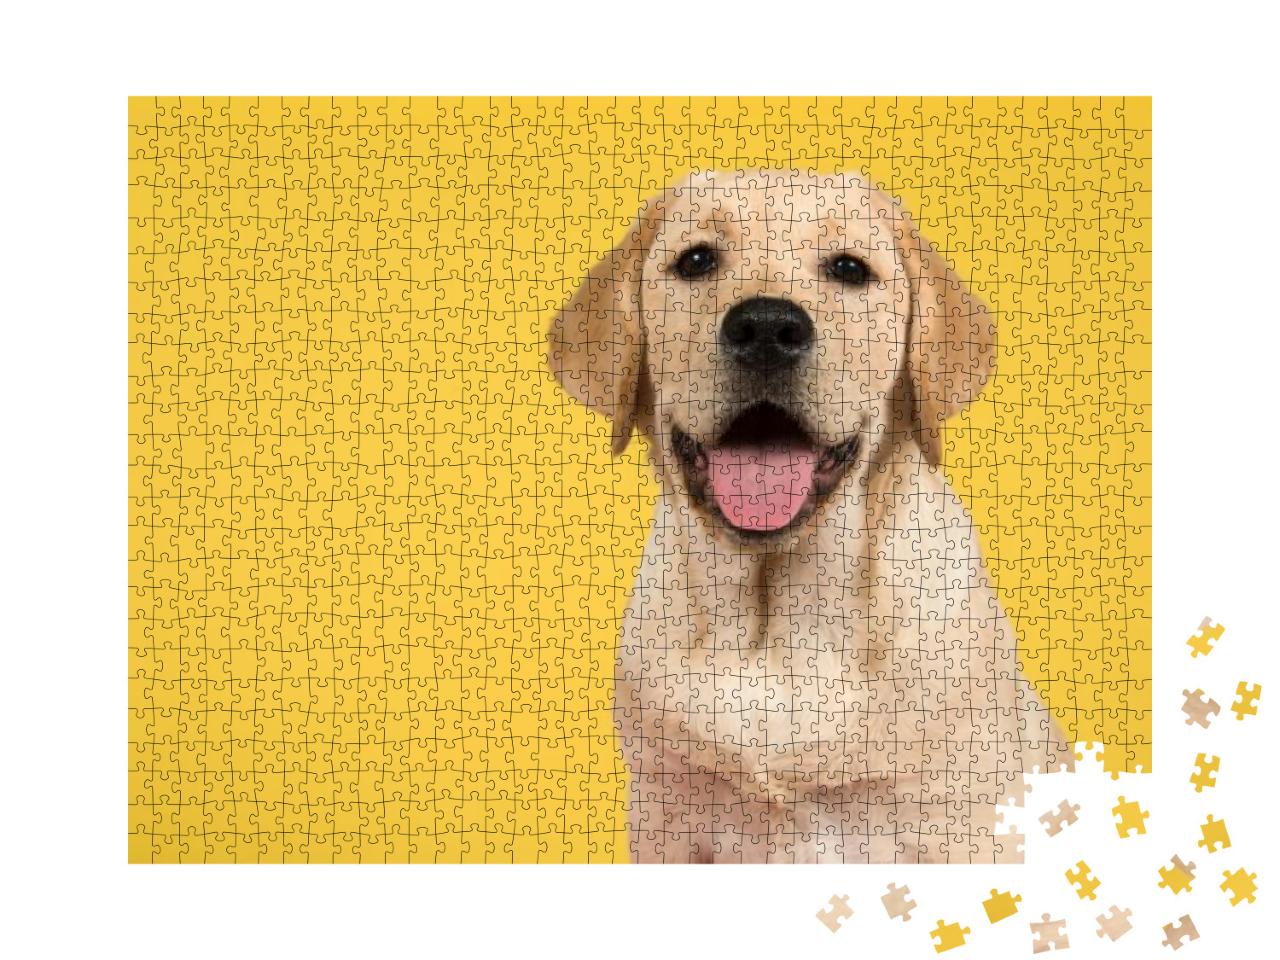 Portrait of a Blond Labrador Retriever Puppy on a Yellow... Jigsaw Puzzle with 1000 pieces